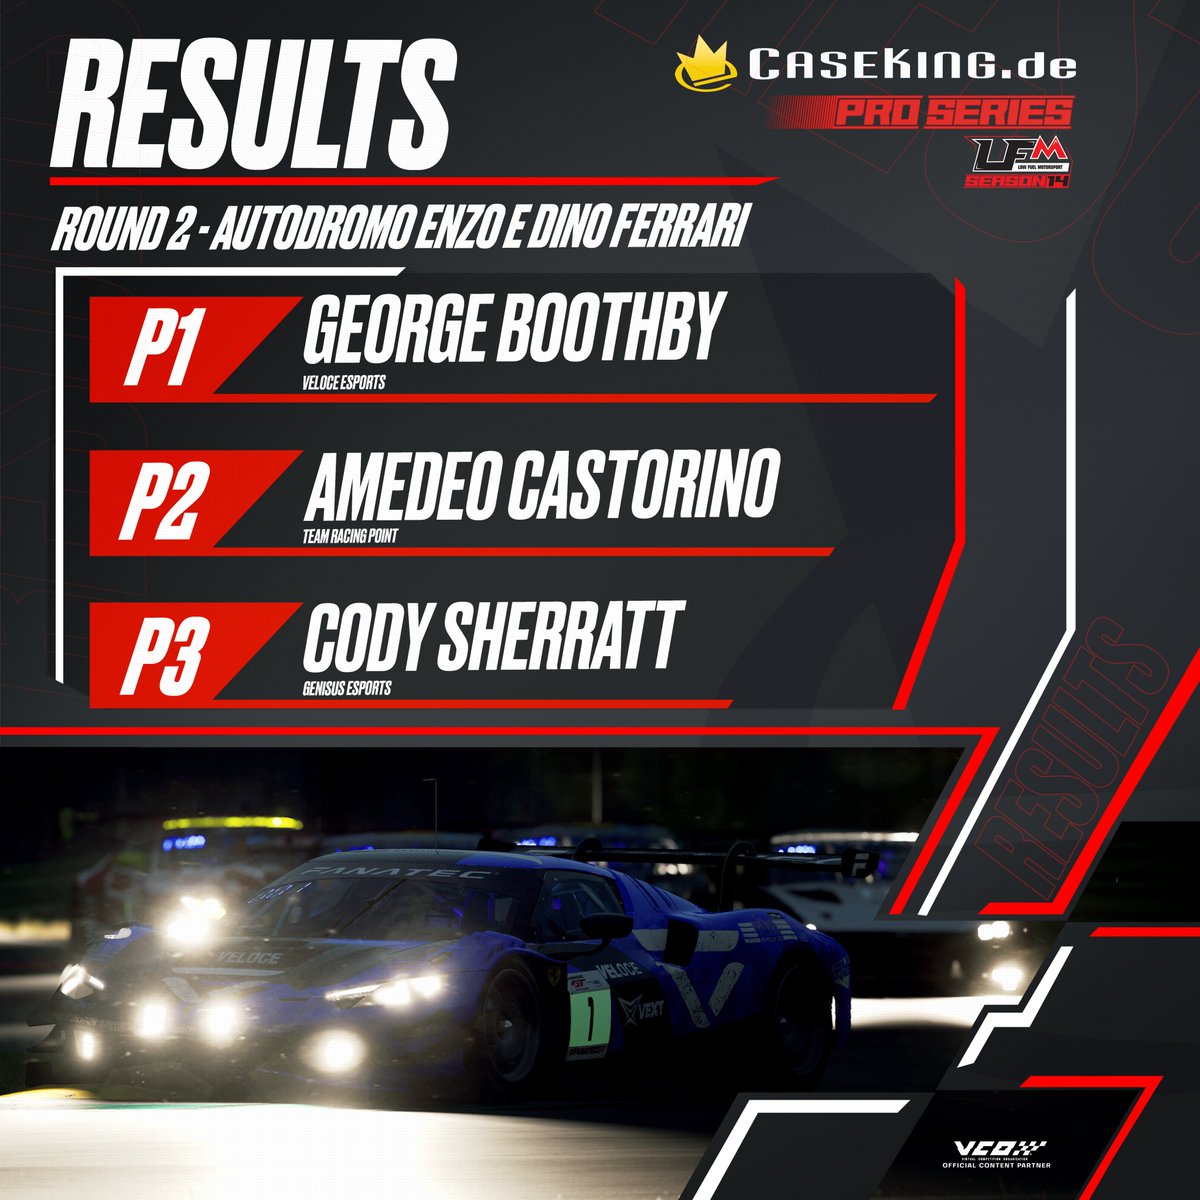 Win #2 in race #2 for George Boothby in the @Caseking PRO Series last week. @ukogmonkey makes it to the top of the podium with a great performance from P5 in qualifying. @amedeo2304 goes even stronger and makes it from P10 to P2 in the race after a mediocre qualifying.…